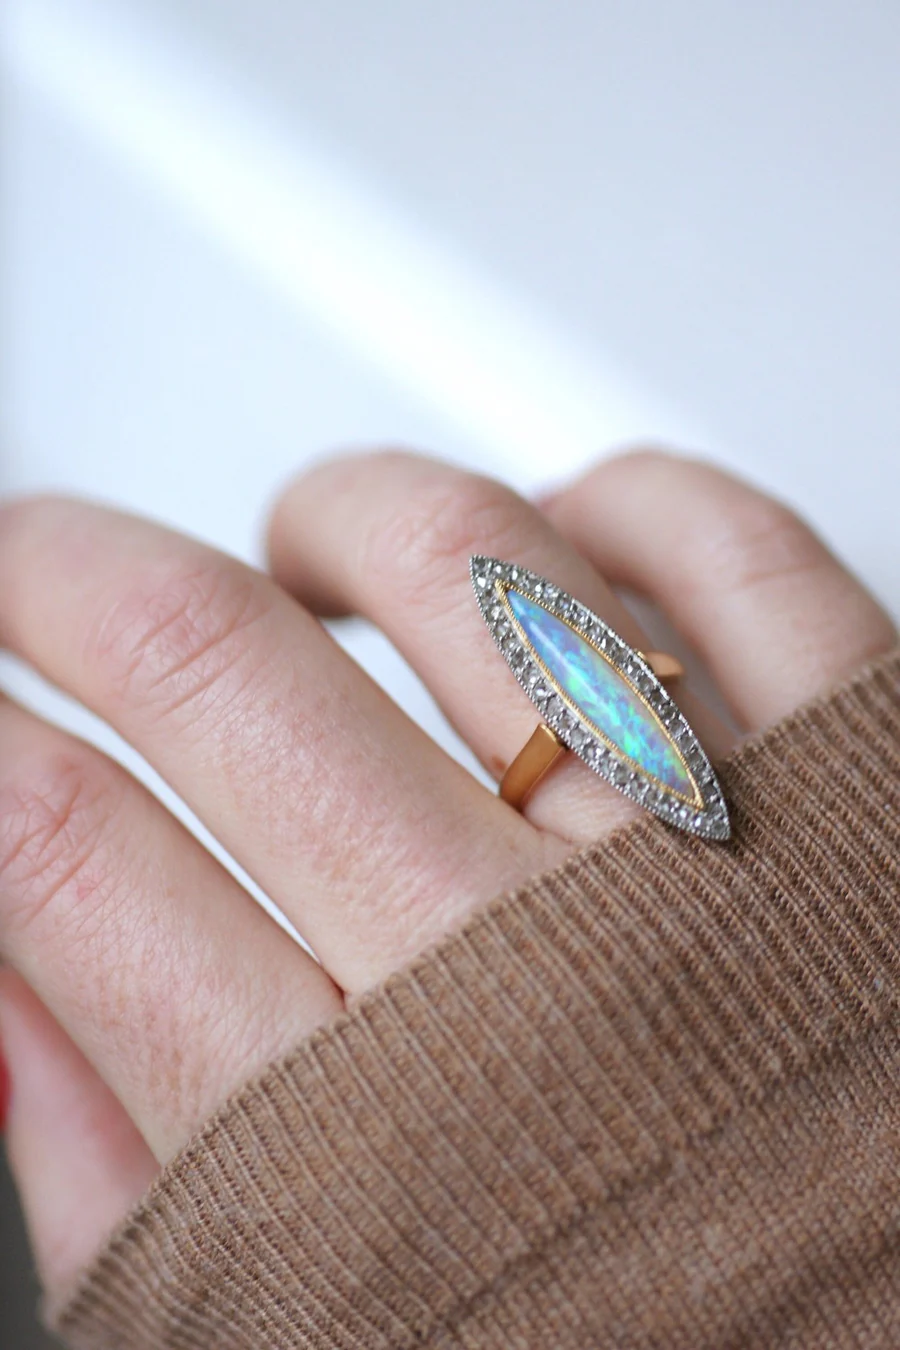 Marquise opal ring surrounded by diamonds - Galerie Pénélope